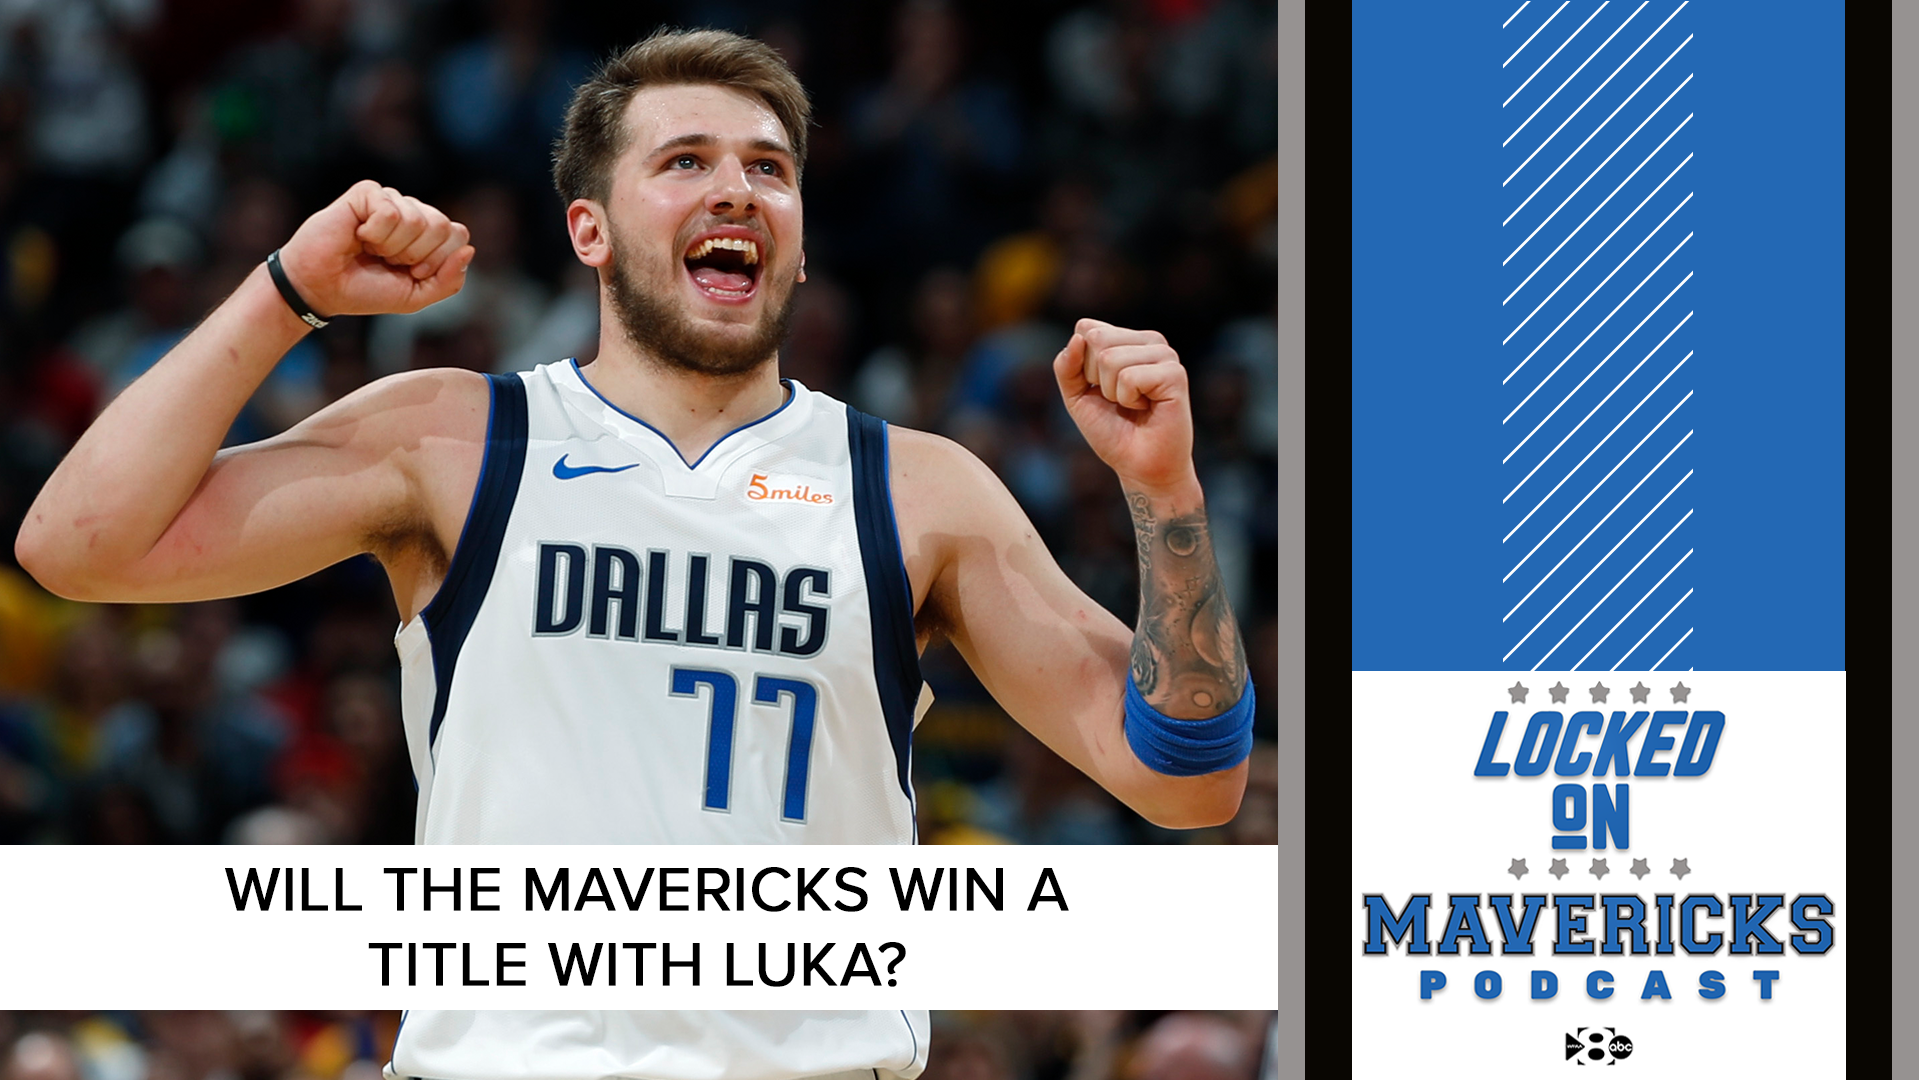 Will the Mavs win an NBA title by the end of Luka's contract? @NickVanExit and @lgunnnn play "Dallas Mavericks Stock Market."